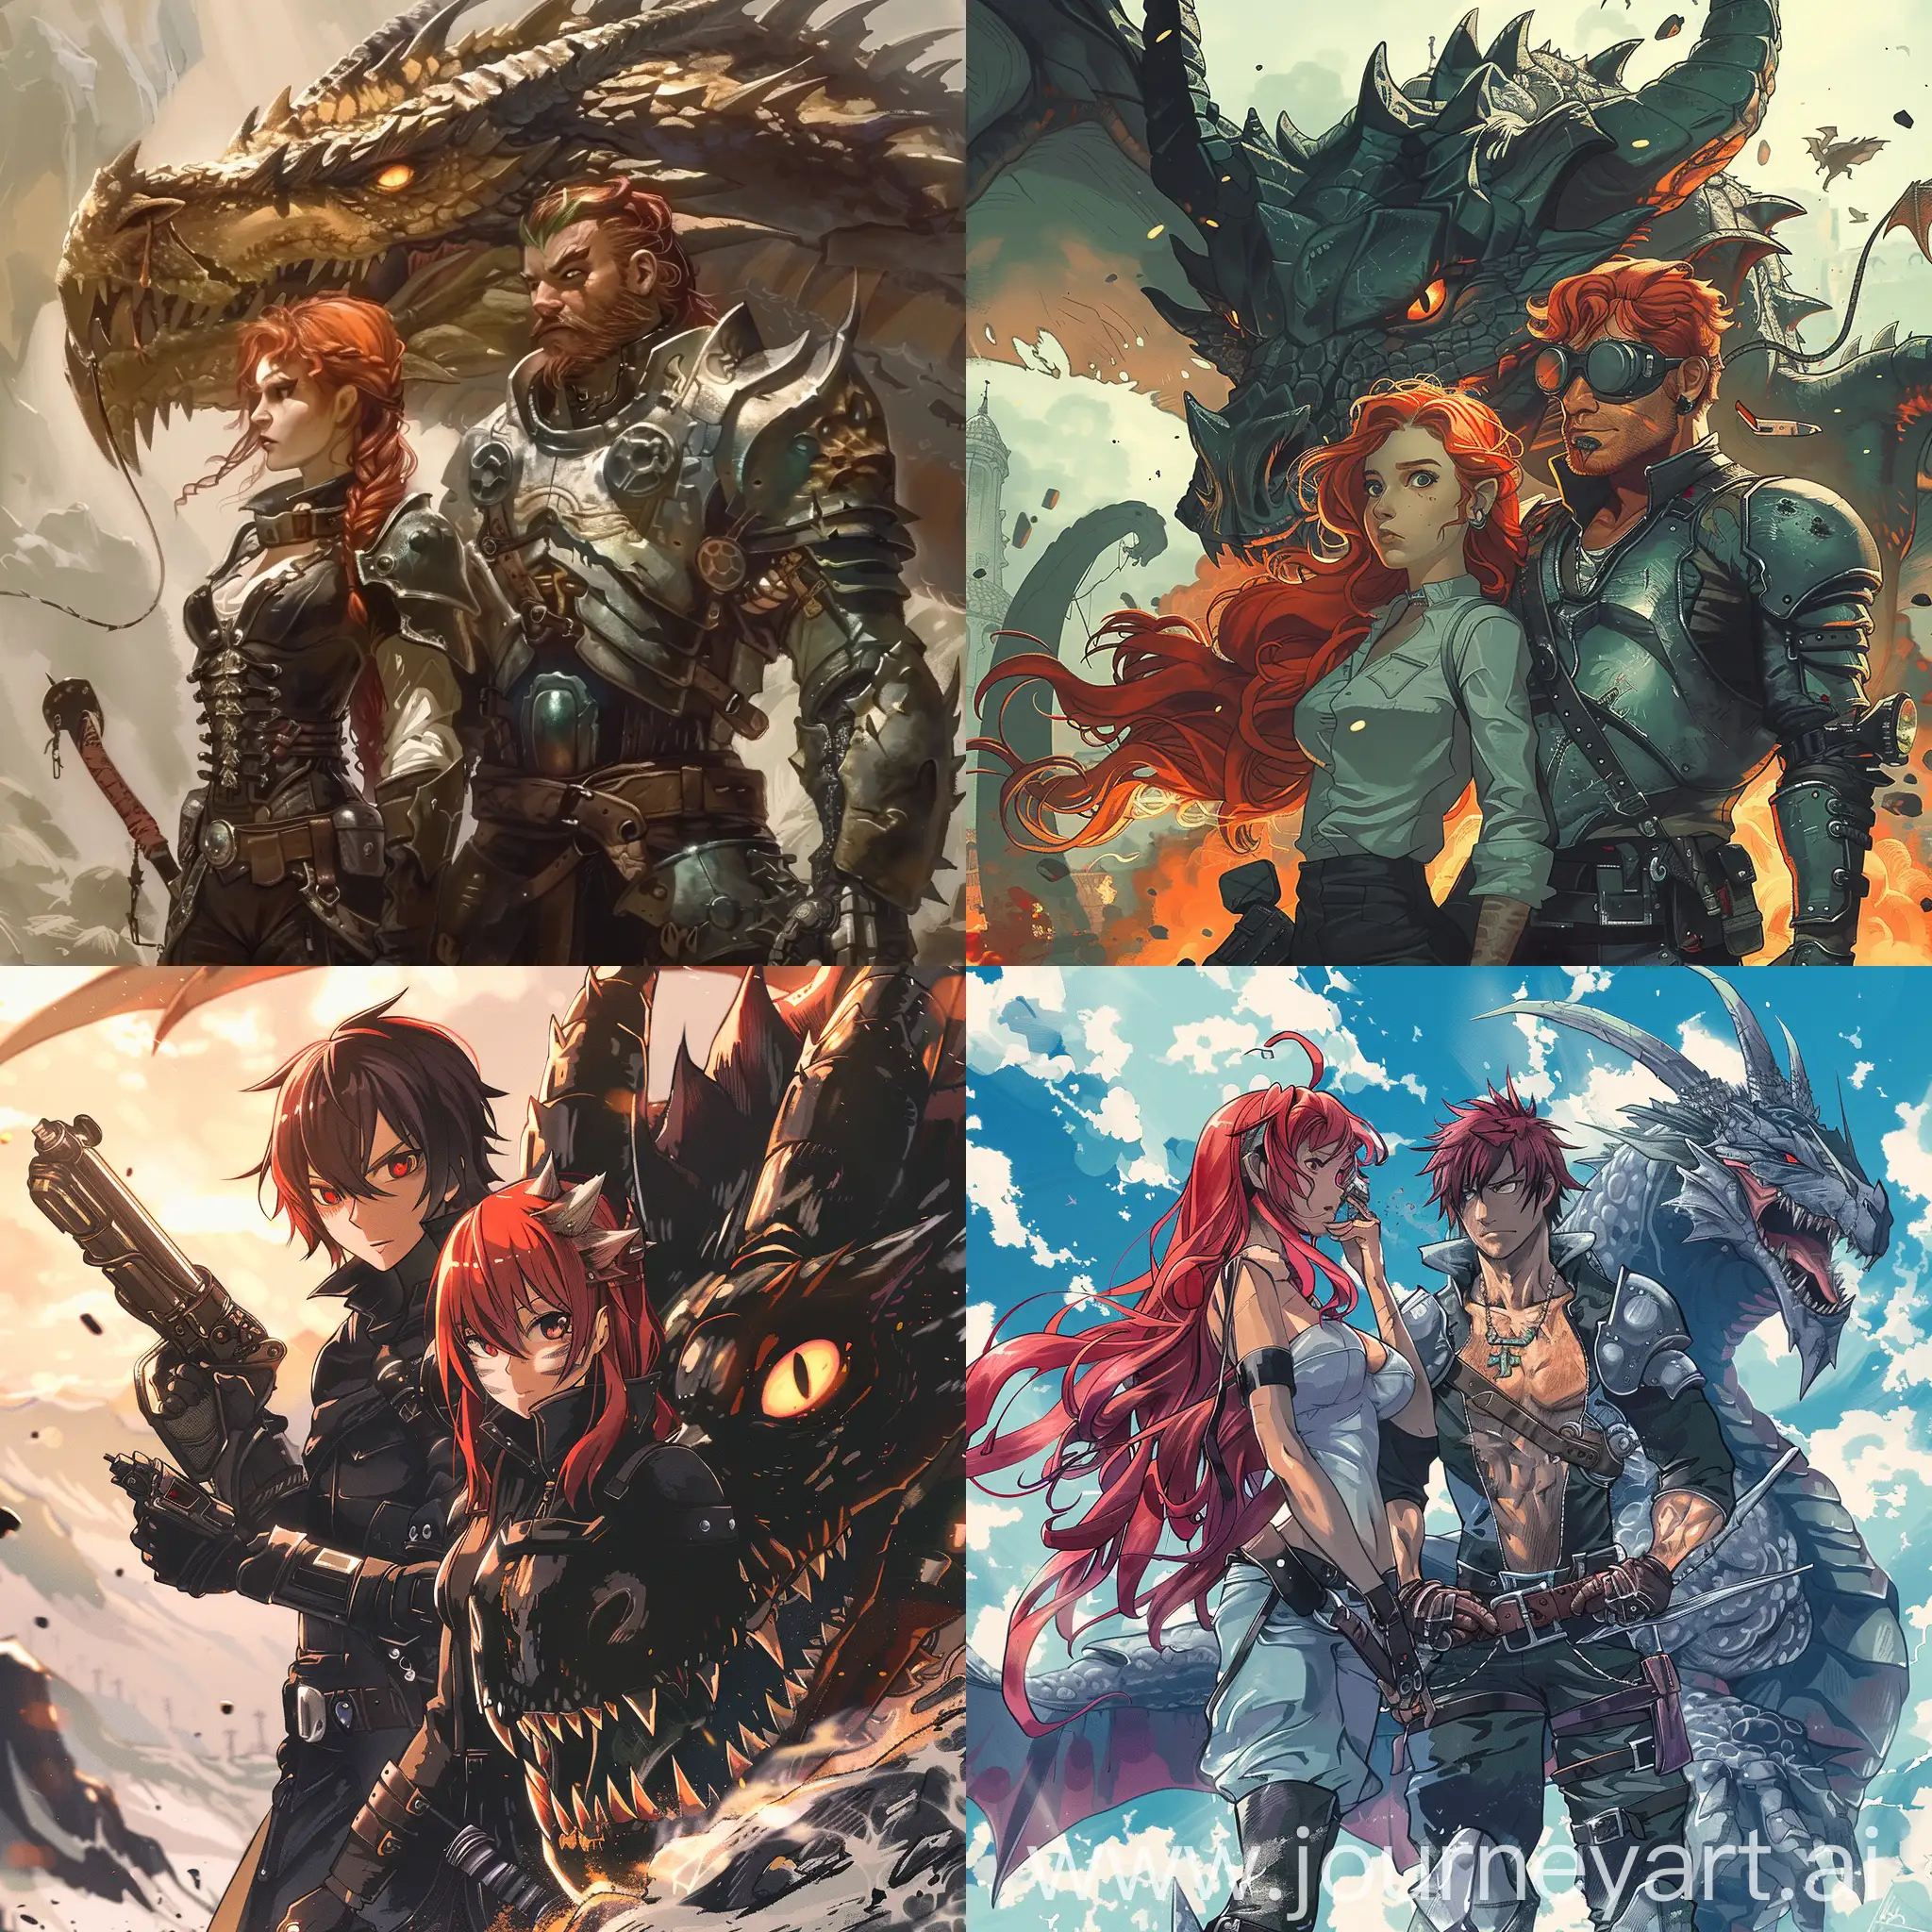 Epic-Battle-The-Metalist-and-the-RedHaired-Girl-Conquer-the-Dragon